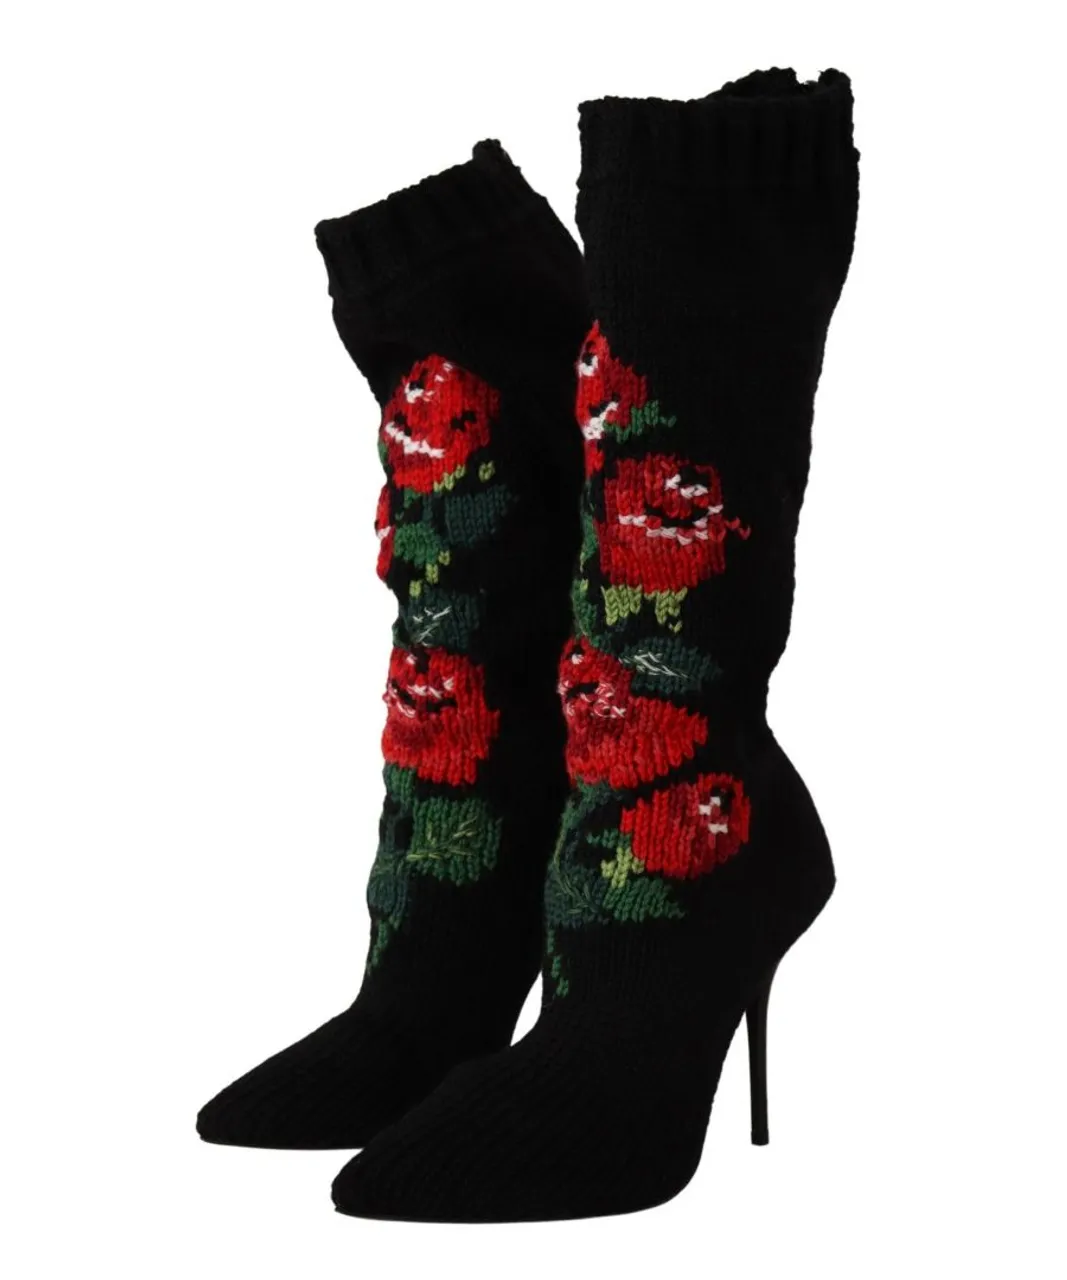 Dolce & Gabbana Black Stretch Socks Red Roses Booties WoMens Shoes Wool